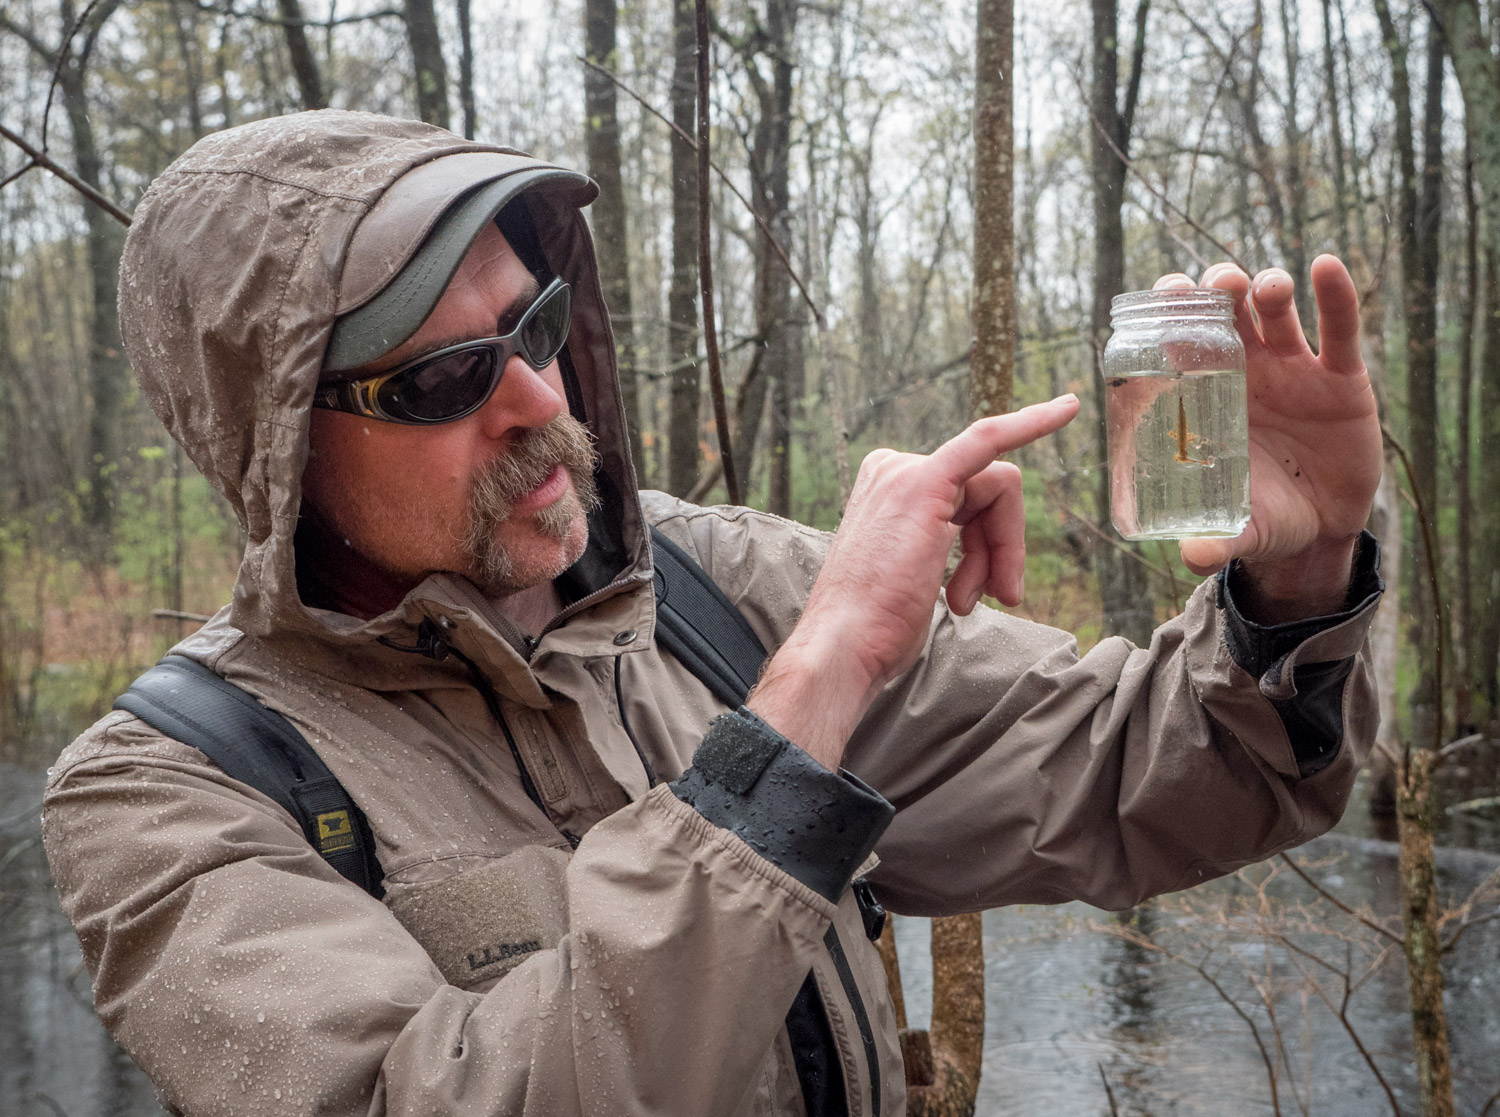 Matt Burne finds life in a vernal pool at Mary Cummings Park